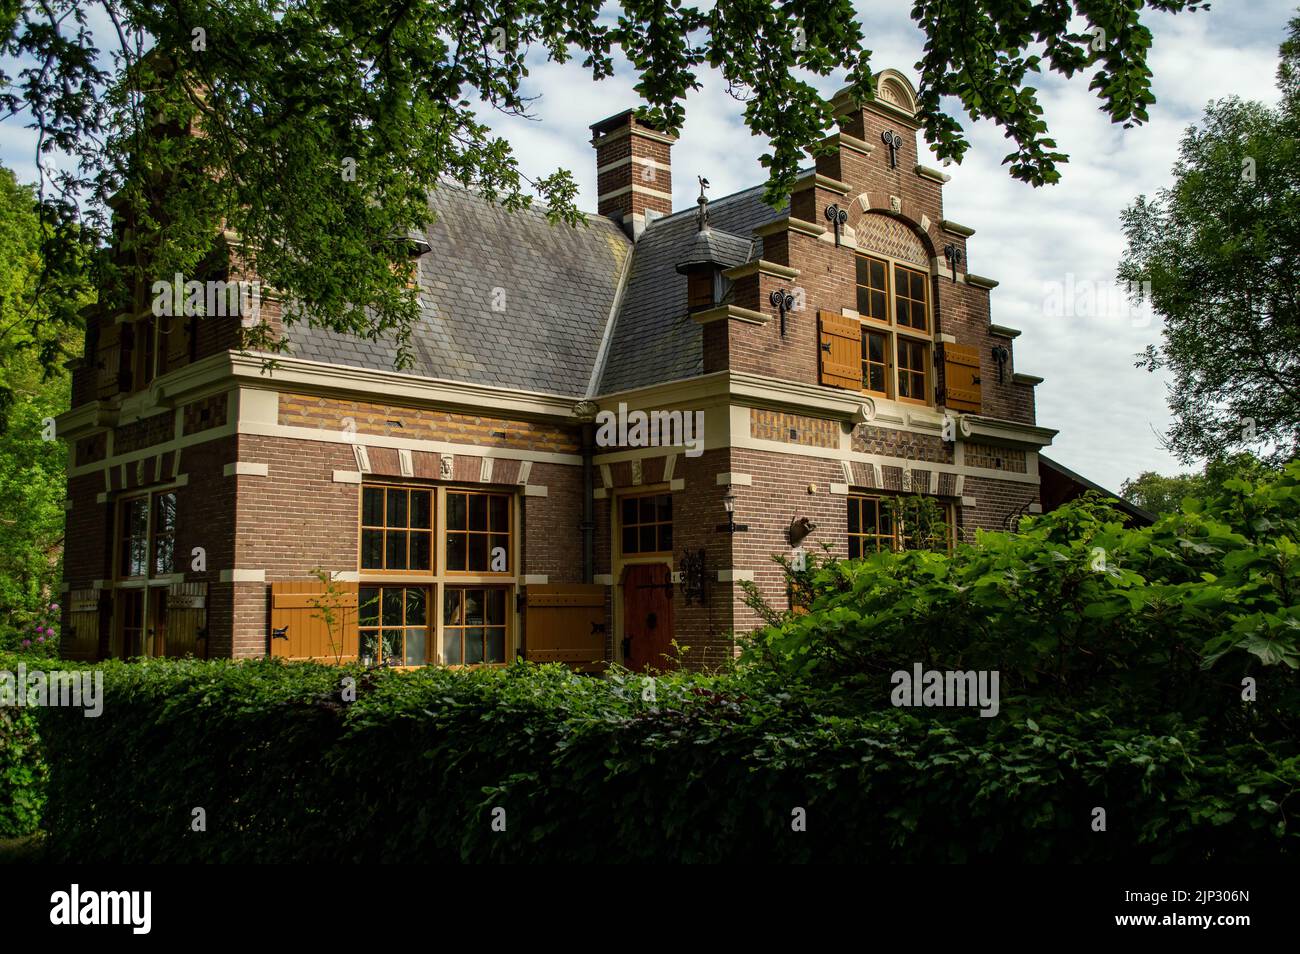 A traditional house in a rural area in the Netherlands, Voorschoten Stock Photo